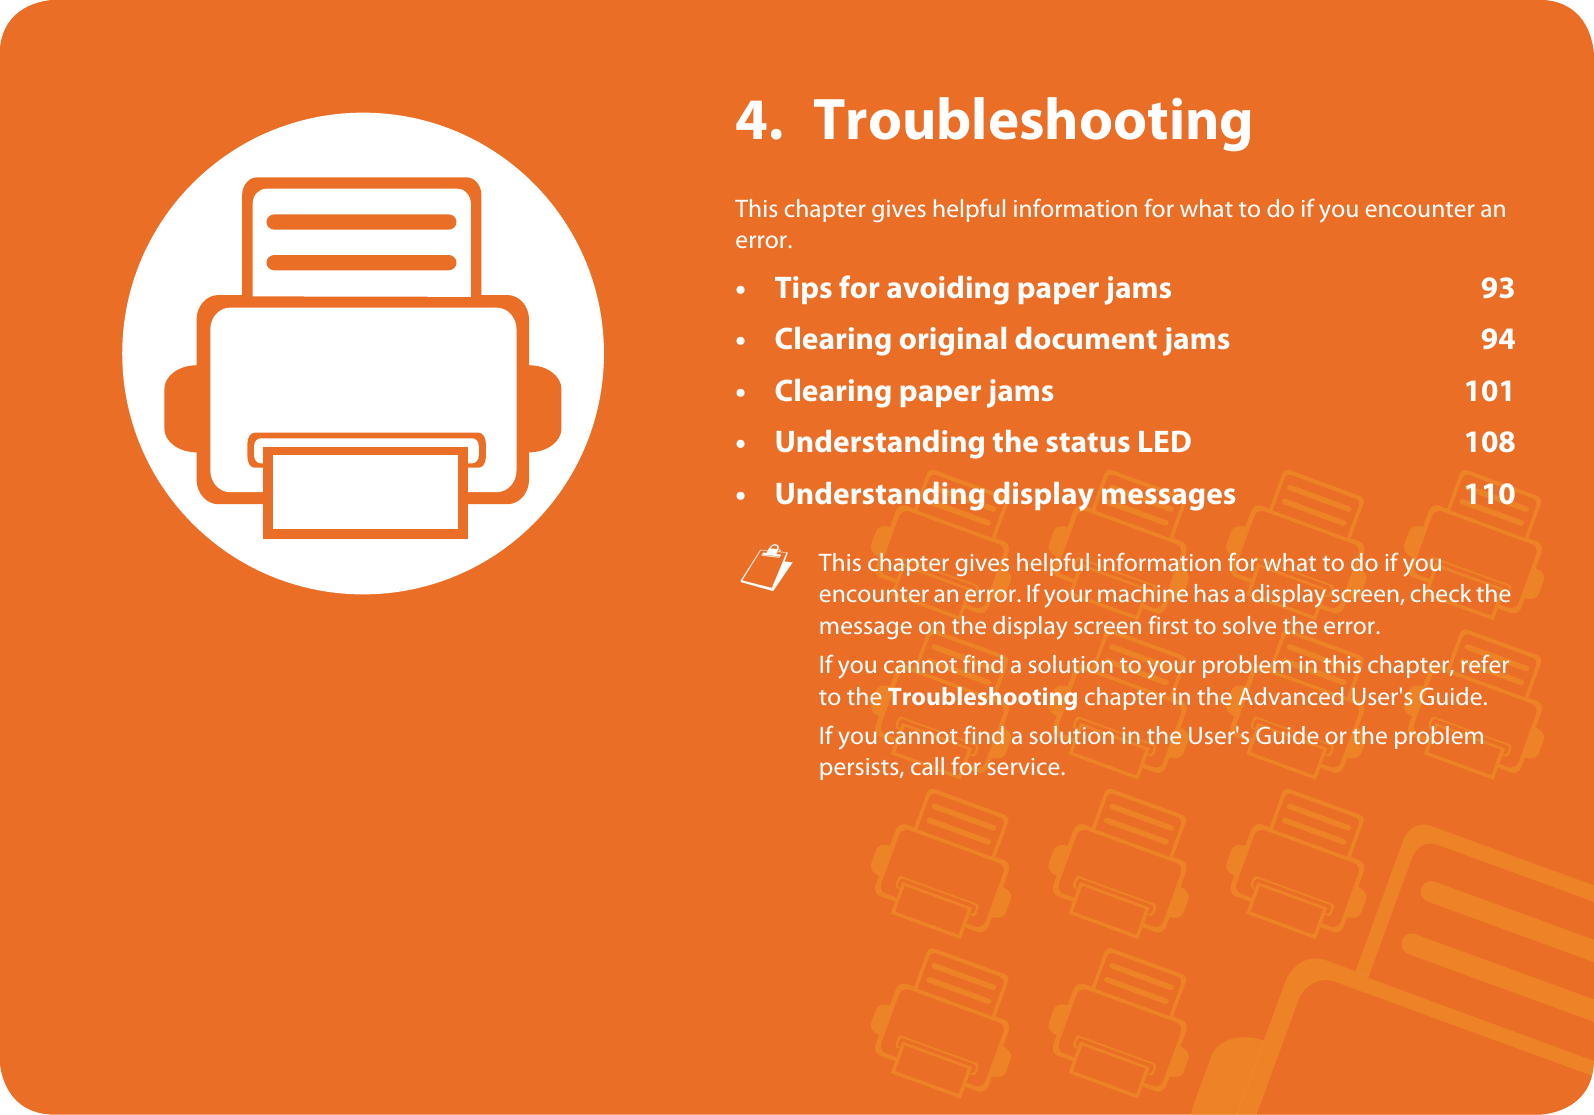 4. TroubleshootingThis chapter gives helpful information for what to do if you encounter an error.• Tips for avoiding paper jams 93• Clearing original document jams 94• Clearing paper jams 101• Understanding the status LED 108• Understanding display messages 110 This chapter gives helpful information for what to do if you encounter an error. If your machine has a display screen, check the message on the display screen first to solve the error.If you cannot find a solution to your problem in this chapter, refer to the Troubleshooting chapter in the Advanced User&apos;s Guide.If you cannot find a solution in the User&apos;s Guide or the problem persists, call for service. 